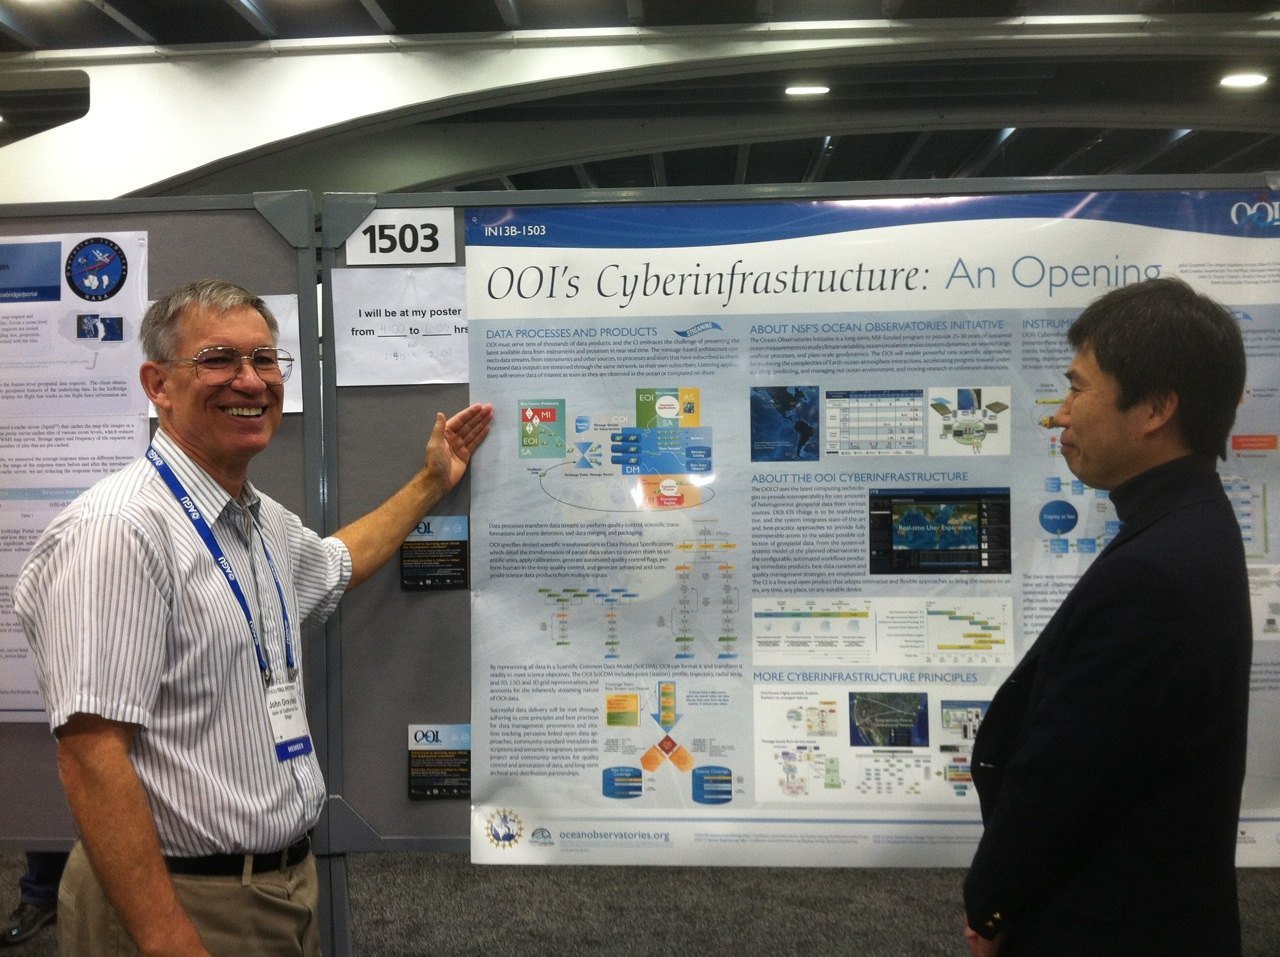 John Graybeal, Product Manager of the OOI Cyberinfrastructure (CI) presents a poster explaining the basics of the OOI Cyberinfrastructure, (Photo Credit: Debi Kilb, CI Communications)